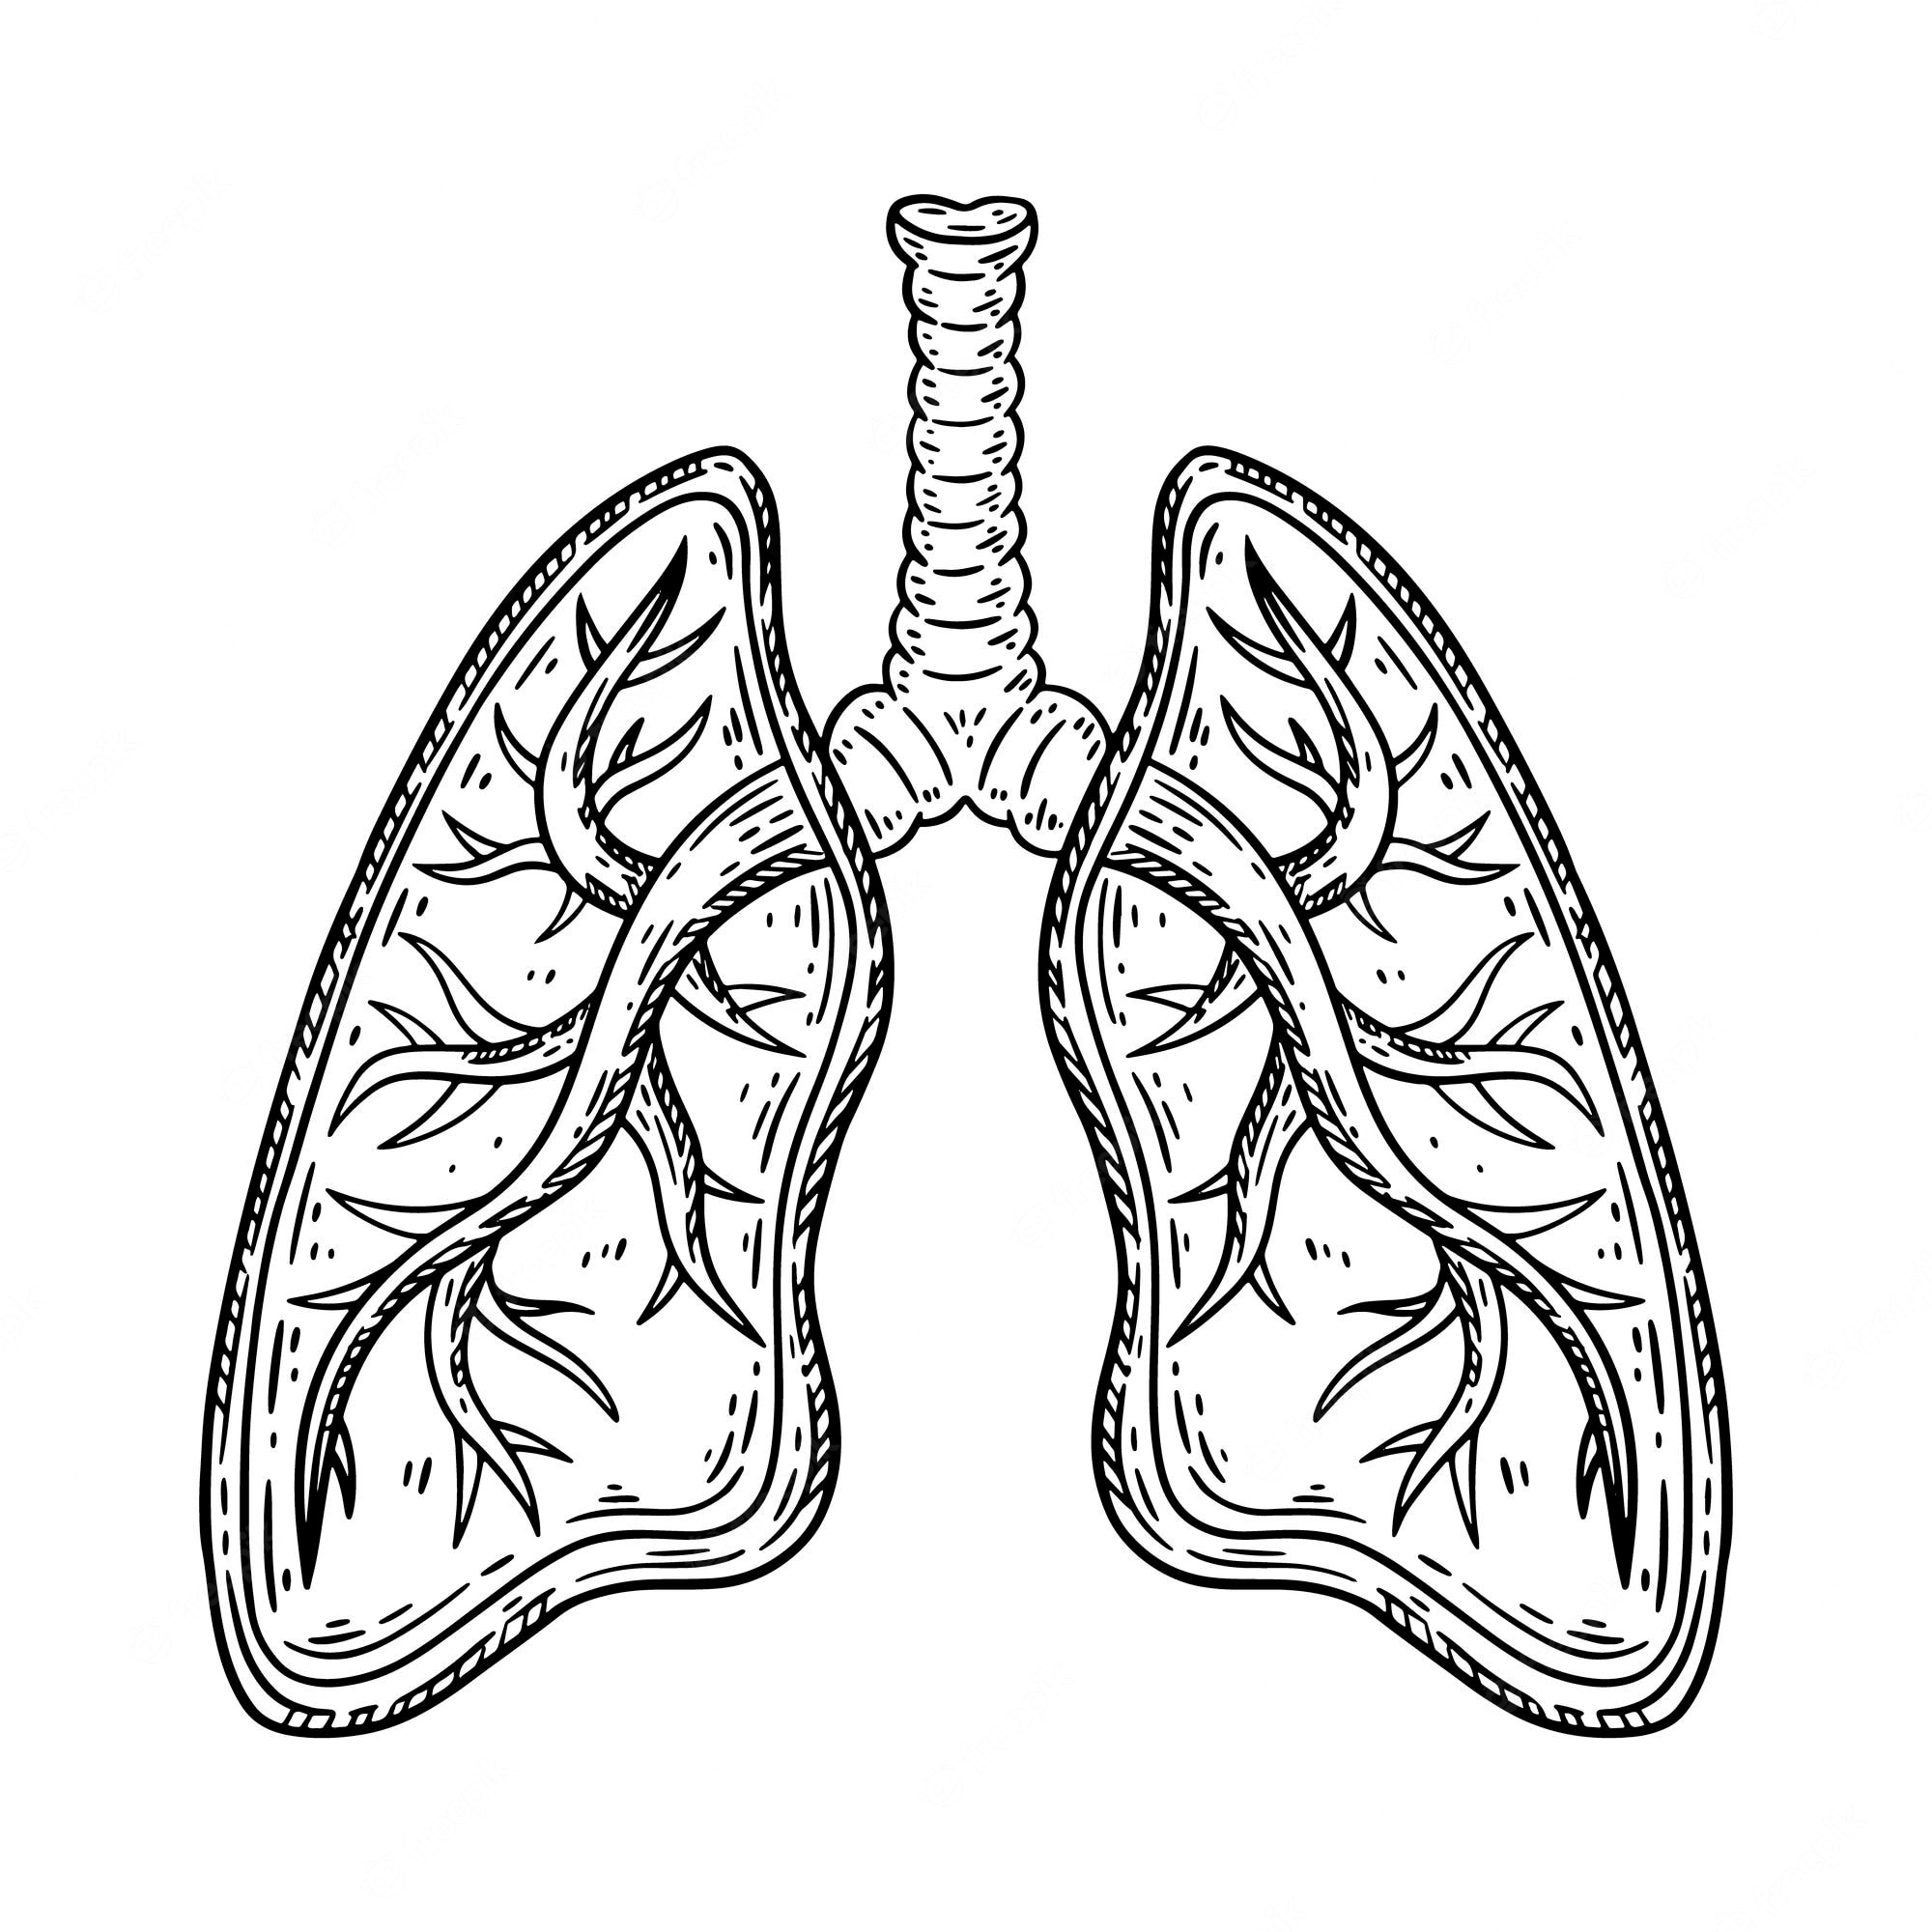 Pulmonary System Images | Free Vectors, Stock Photos & PSD | Page 5